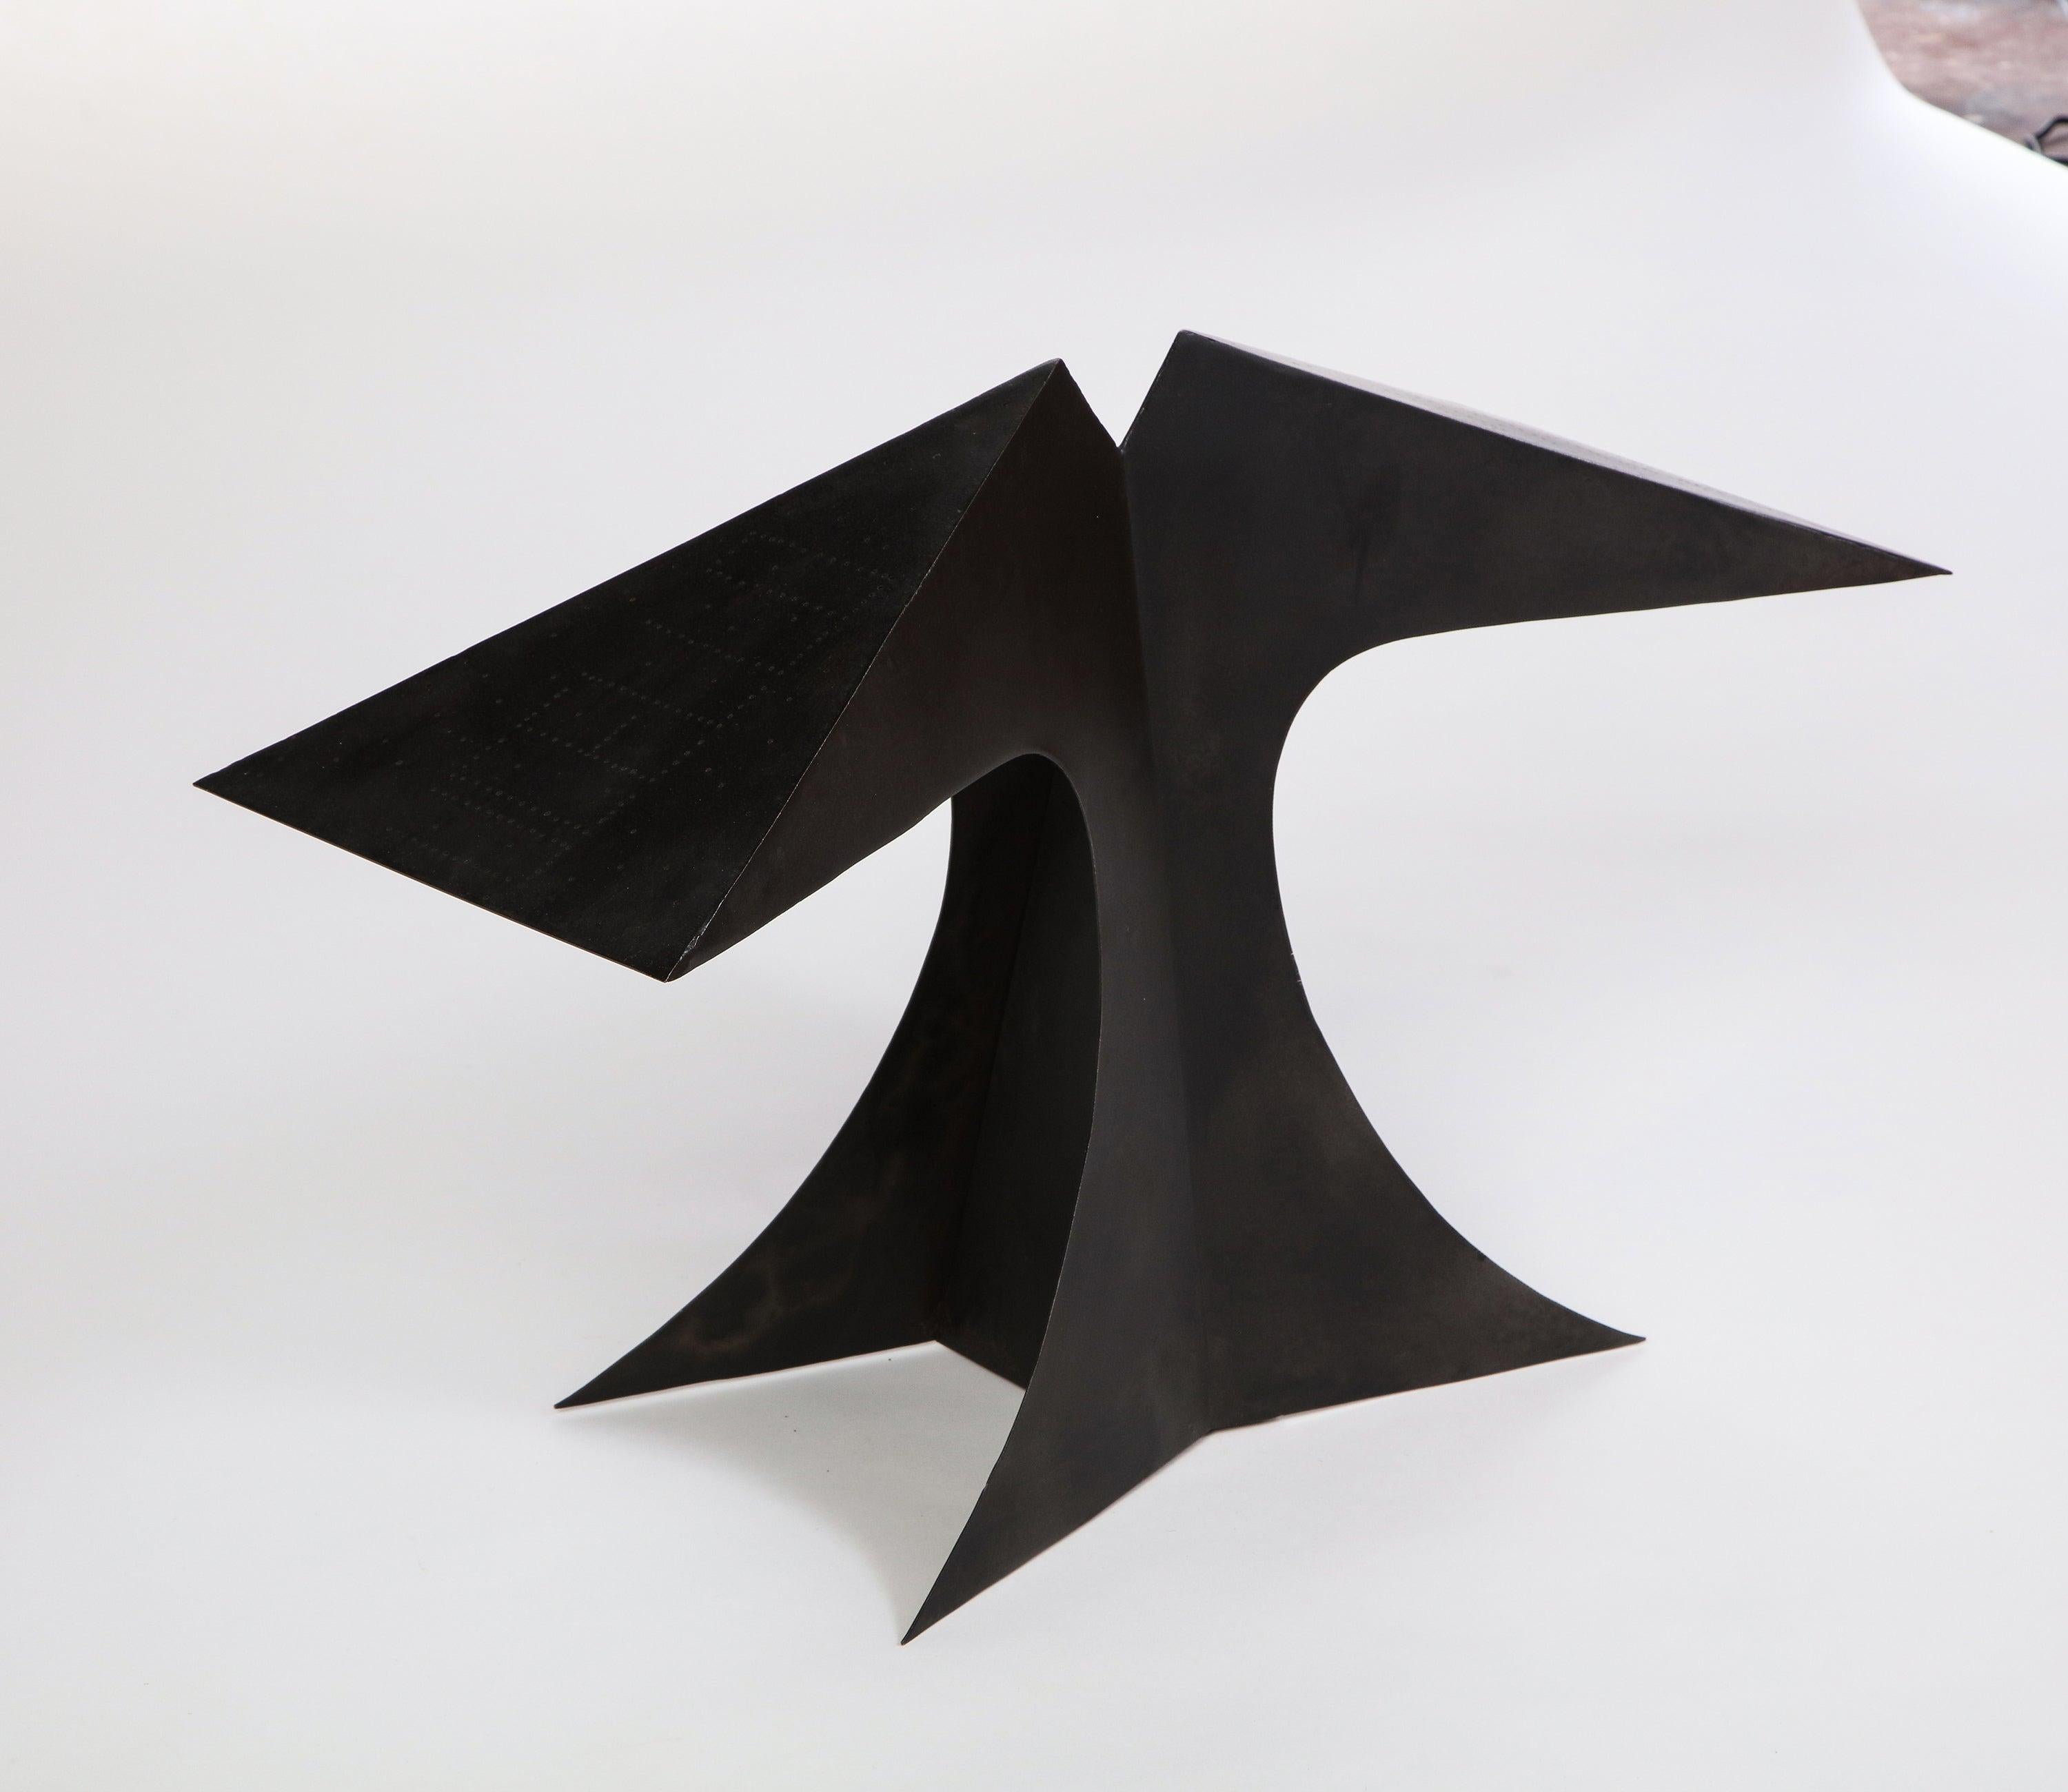 This sculptural 1970's Bernard Quentin black patinated and pierced-metal table lamp serves as a statement piece for any modernist living room. Its striking curves and angular lines make it an attractive companion for a side table or credenza. This